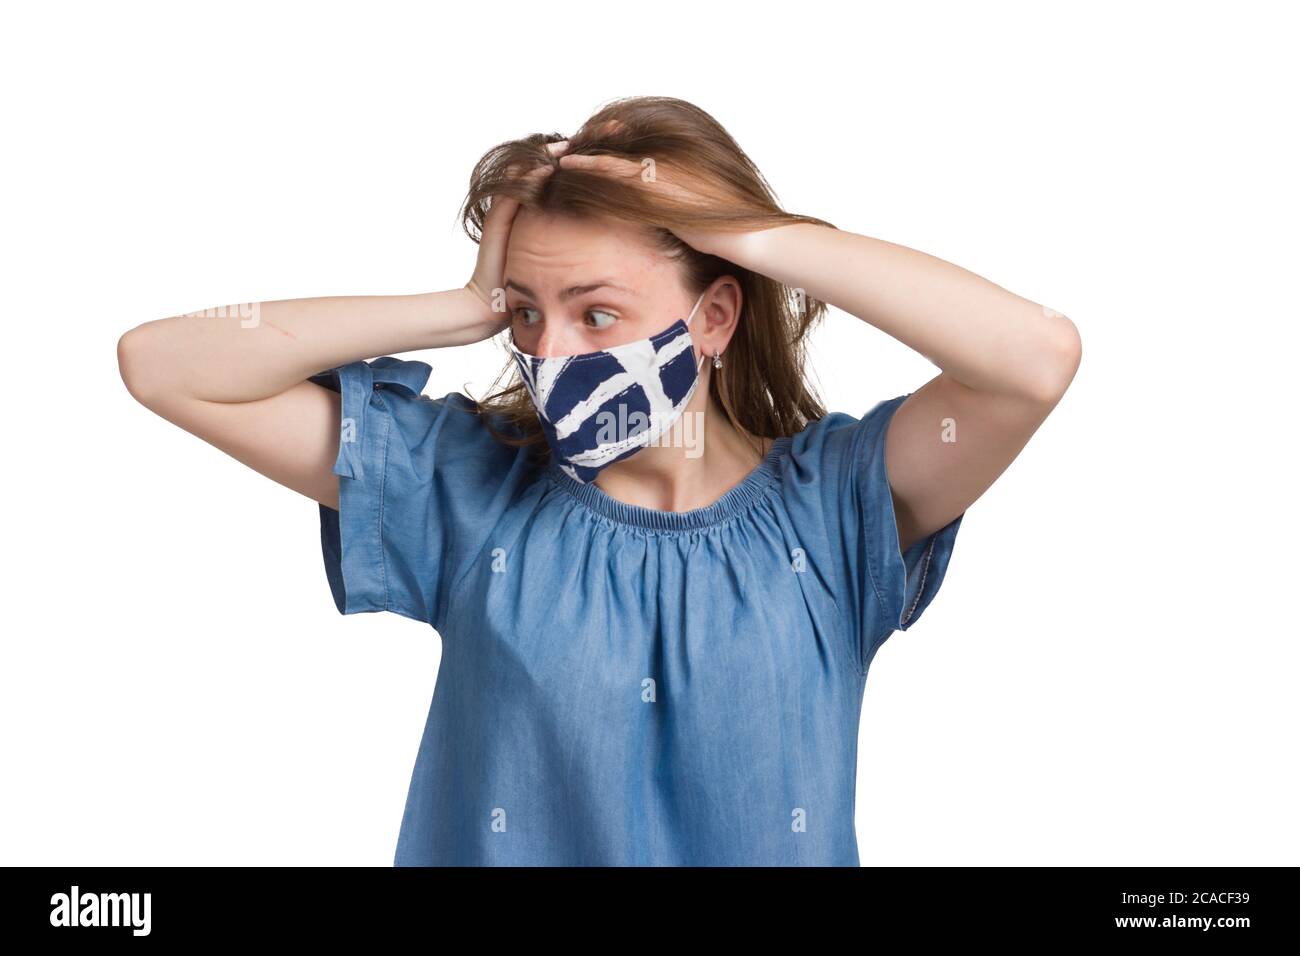 A young girl with long hair in a blue dress. Isolated on a white background. in a medical mask. holding her hands over her head, scared or panicking Stock Photo